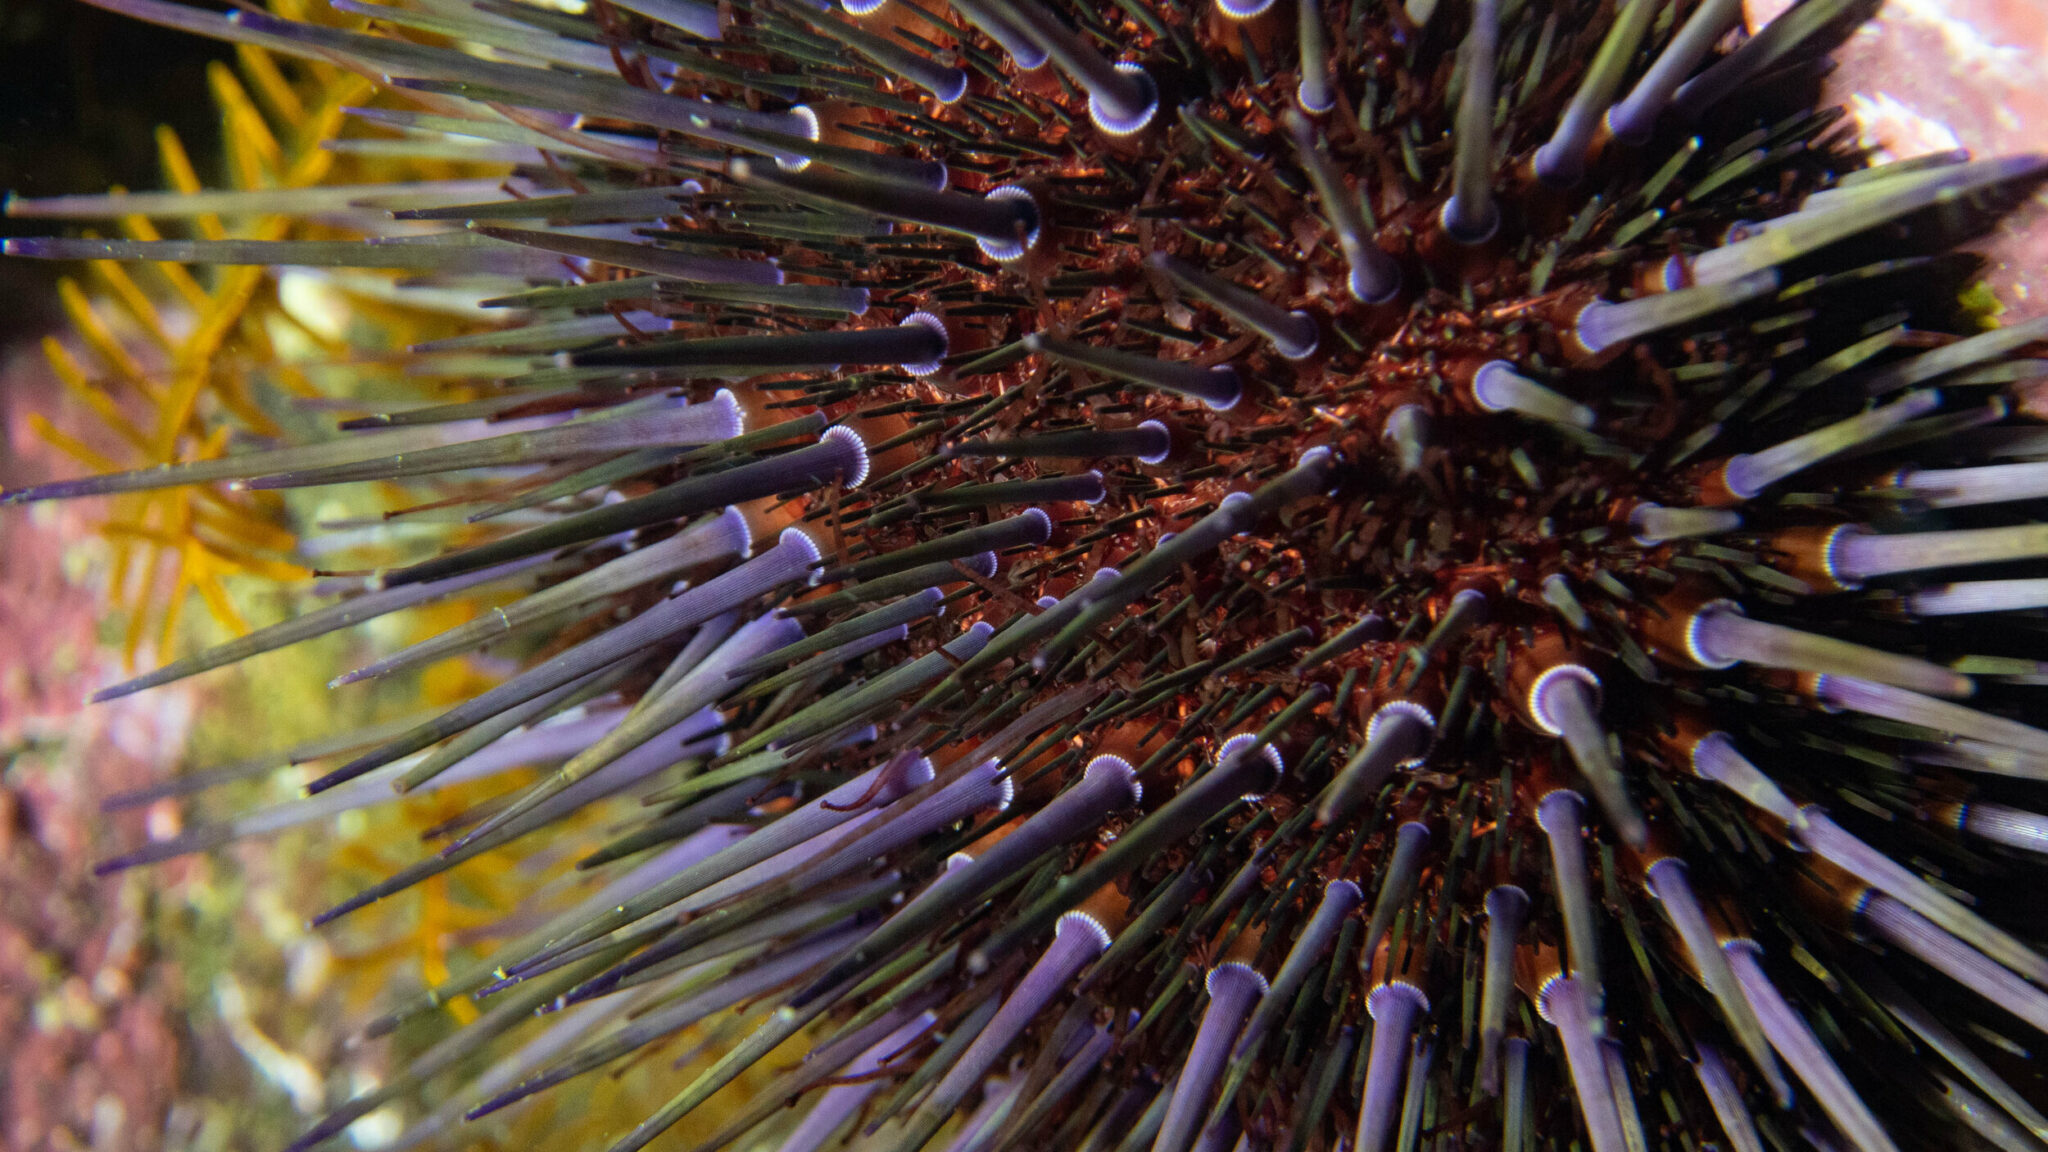 where does the term urchin come from and what does urchin mean